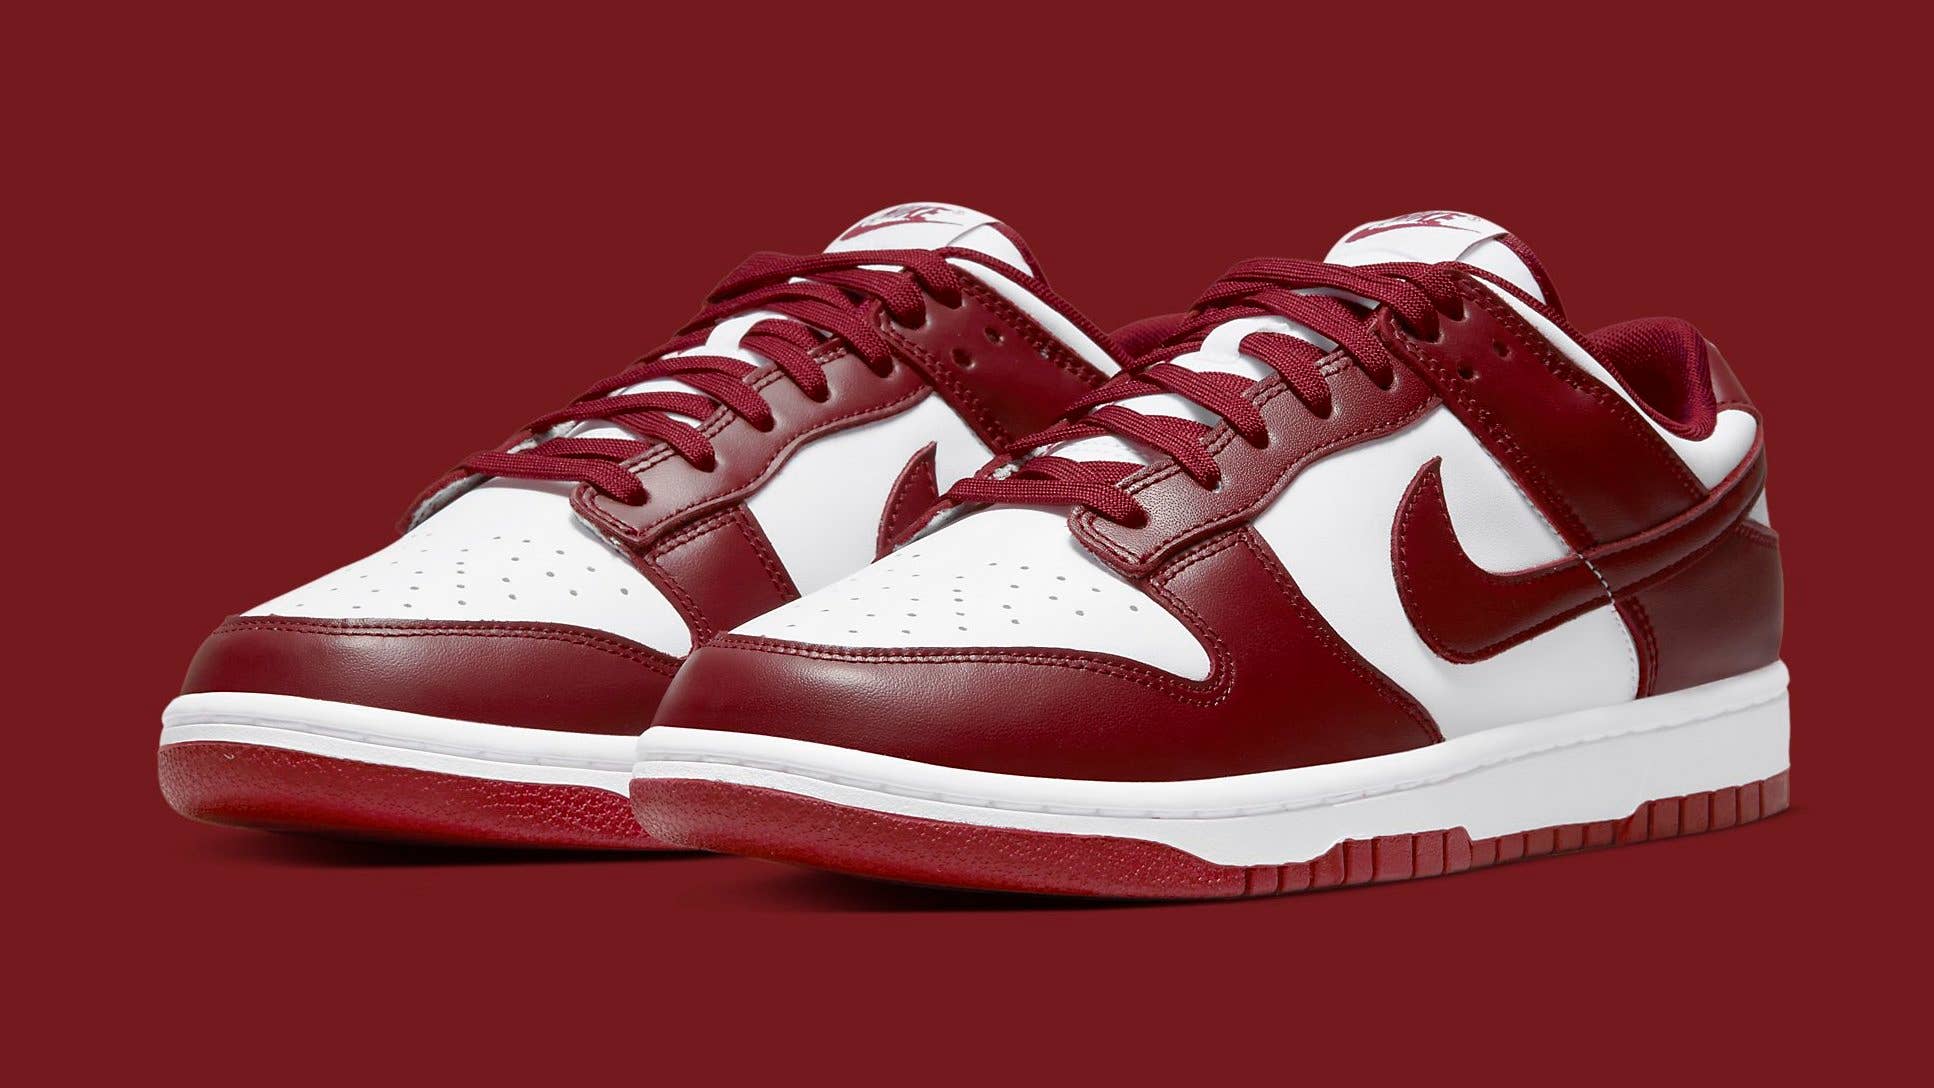 Best Look Yet at the 'Team Red' Nike Dunk | Complex